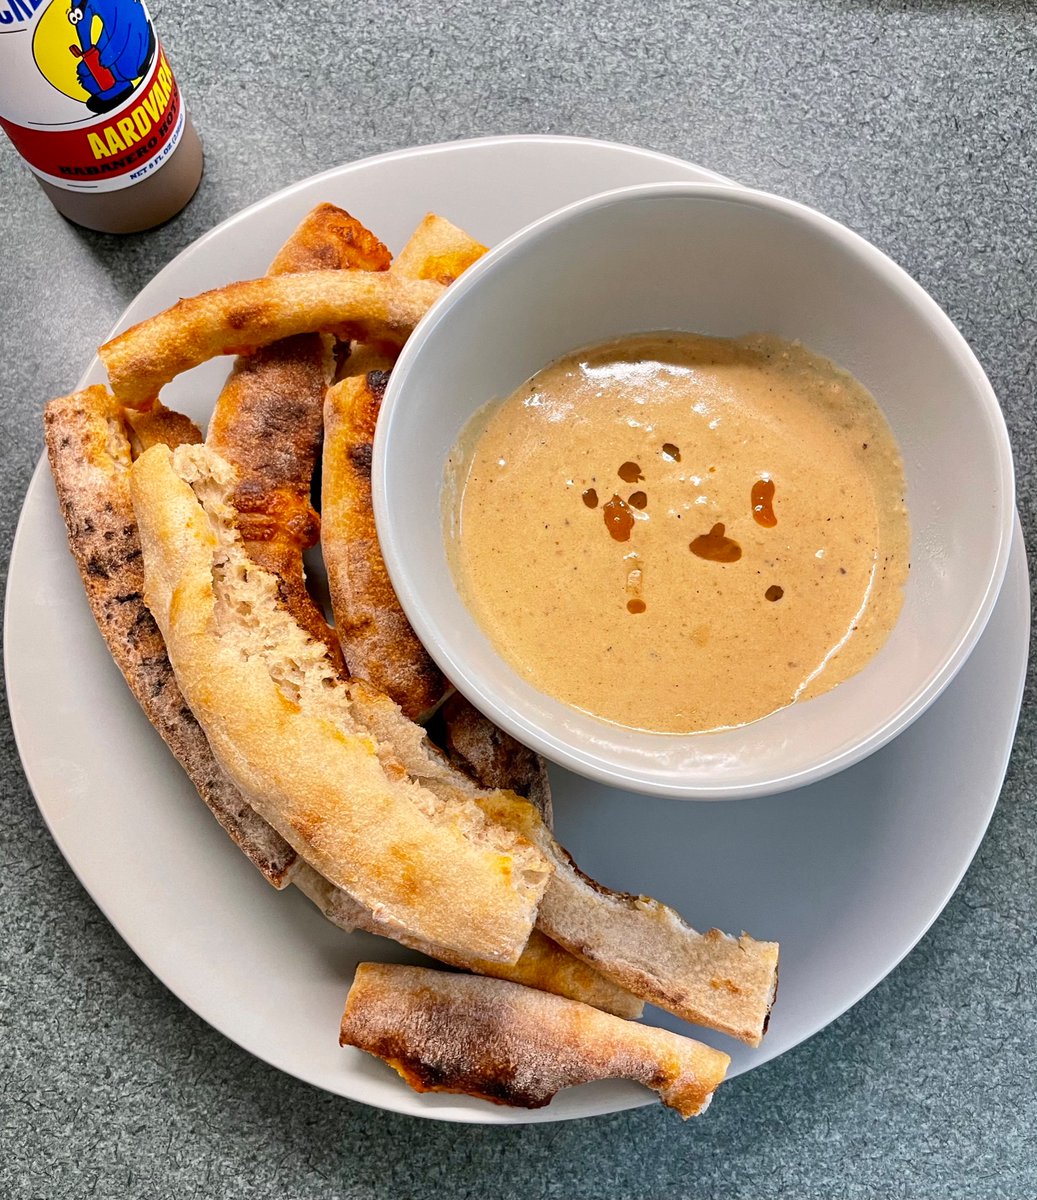 Today’s never-throw-out-food lunch: the kids’ pizza crusts, gravy made quickly in a pan I fried a steak in the other day. (I had pickles on the side for uh balance)